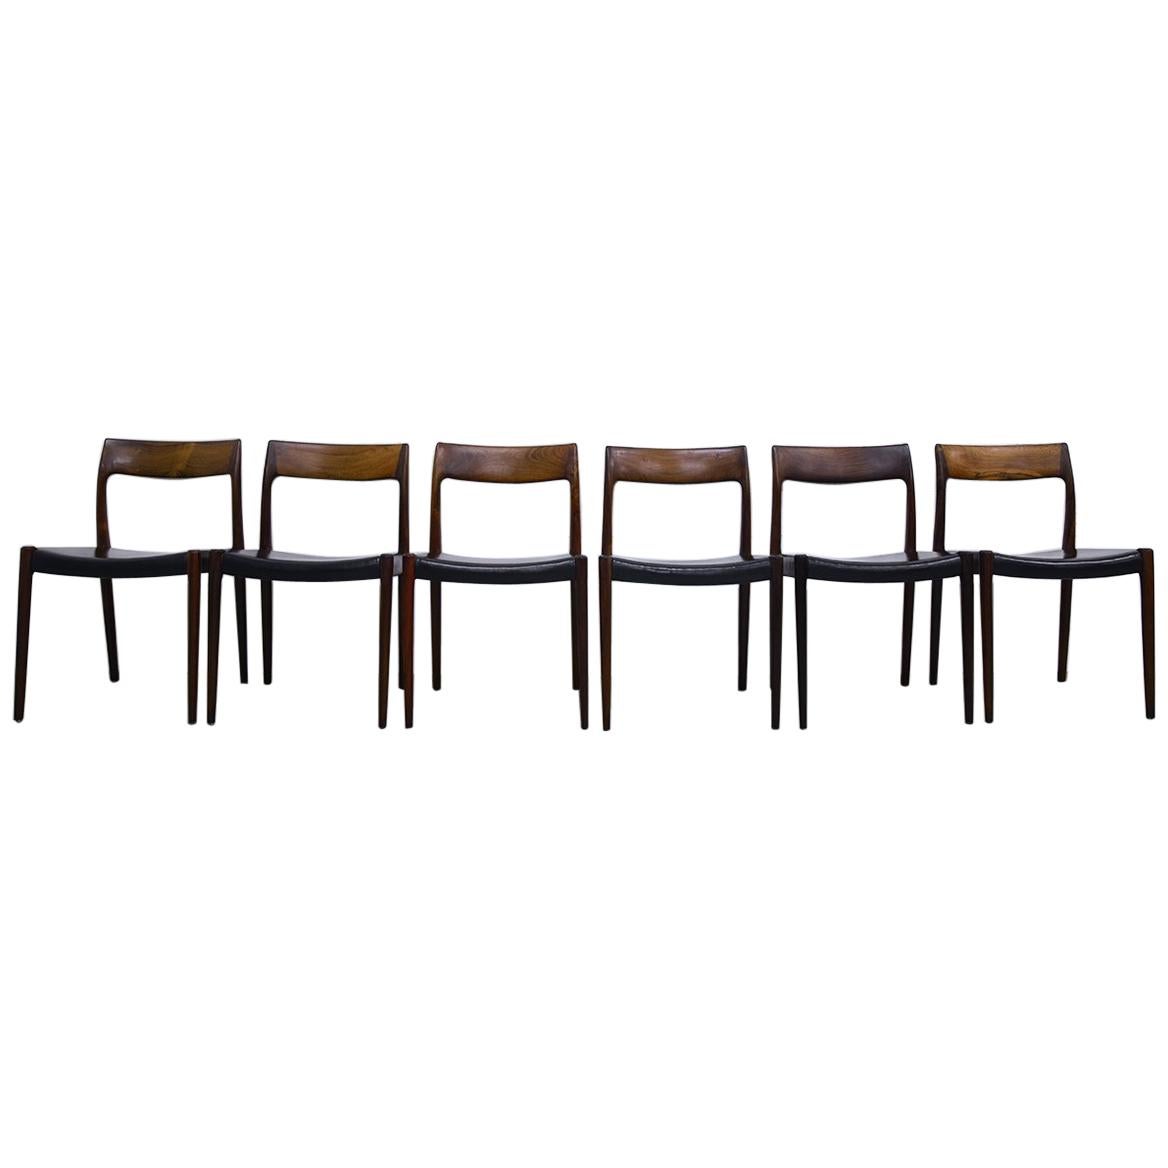 Set of 6 Niels Moller Model 77 Rosewood and Leather Dining Chairs Denmark, 1950s